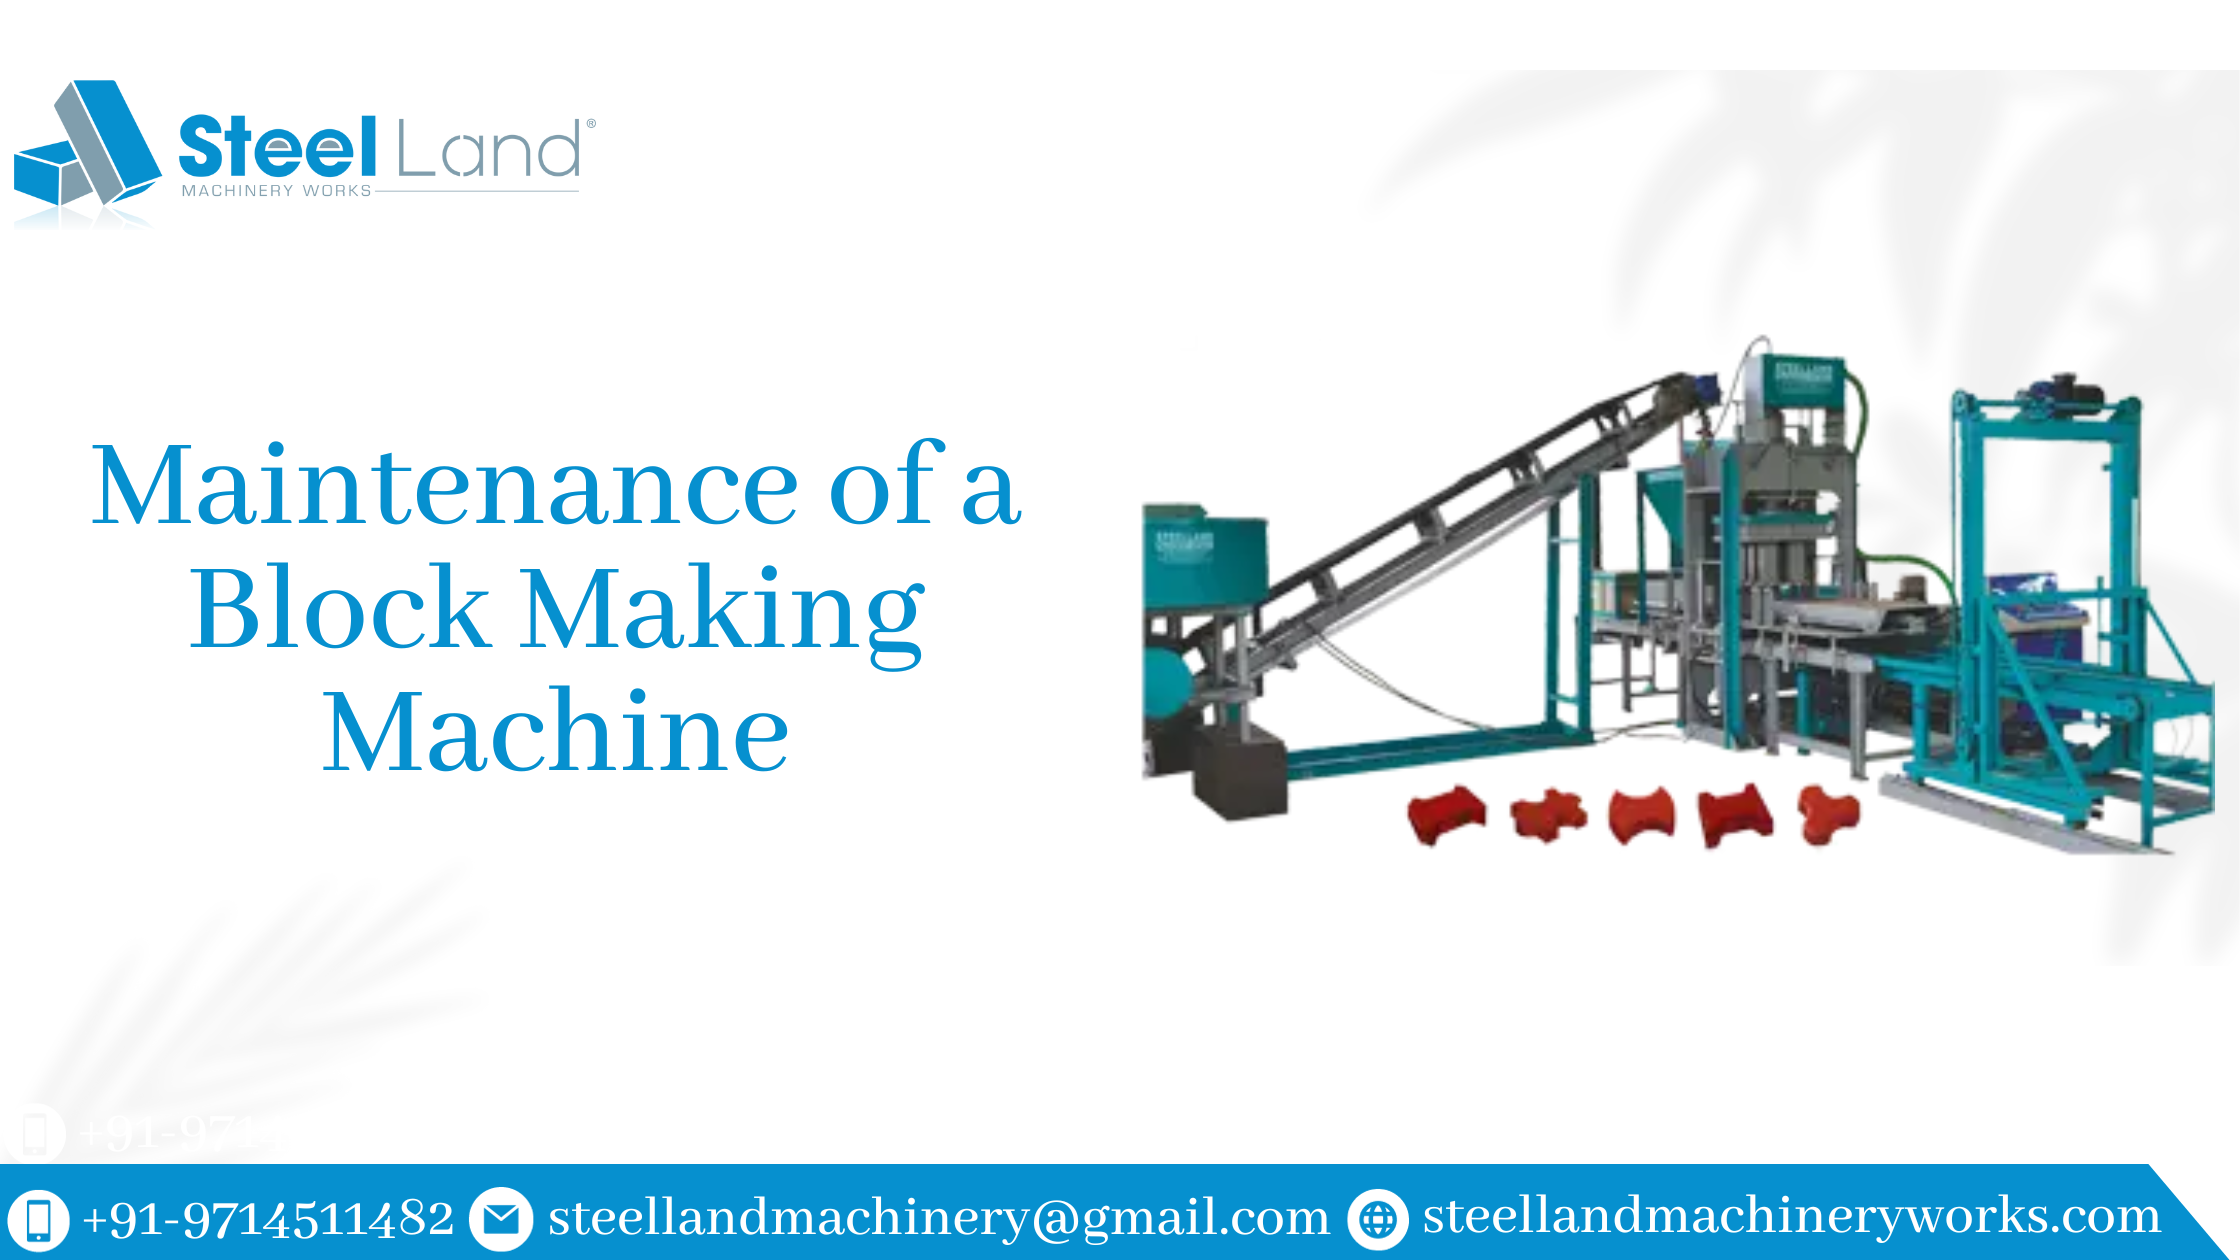 How to Maintain a Block Making Machine?